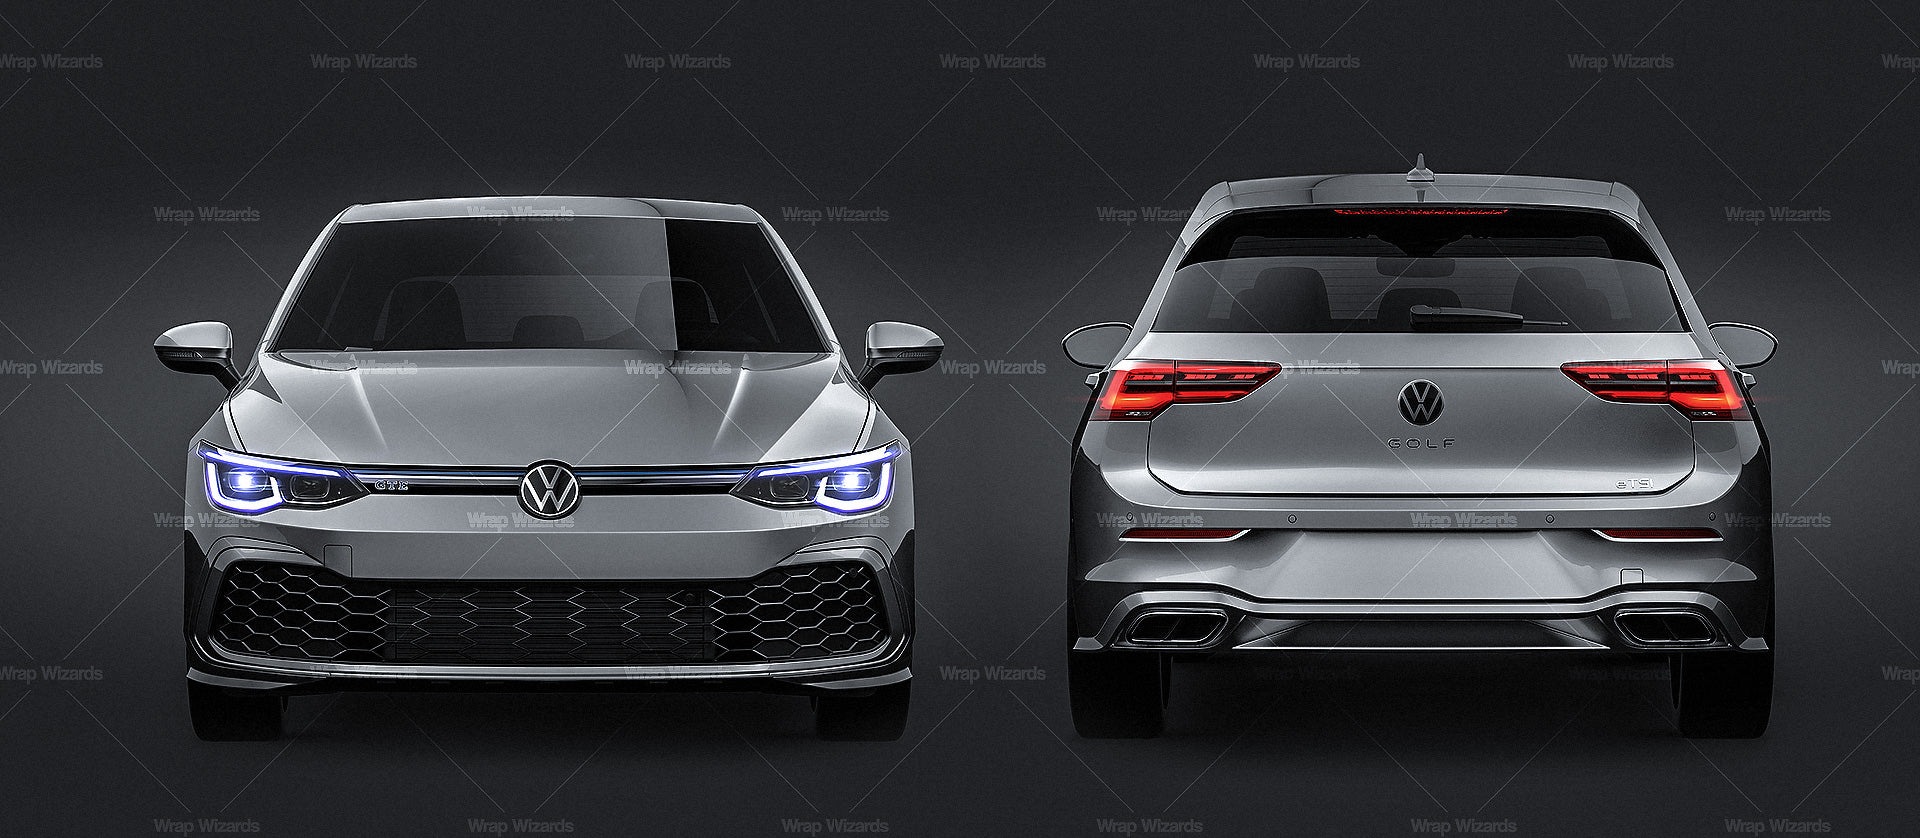 Volkswagen Golf  MK8 GTE 2020 5-Doors glossy finish - all sides Car Mockup Template.psd